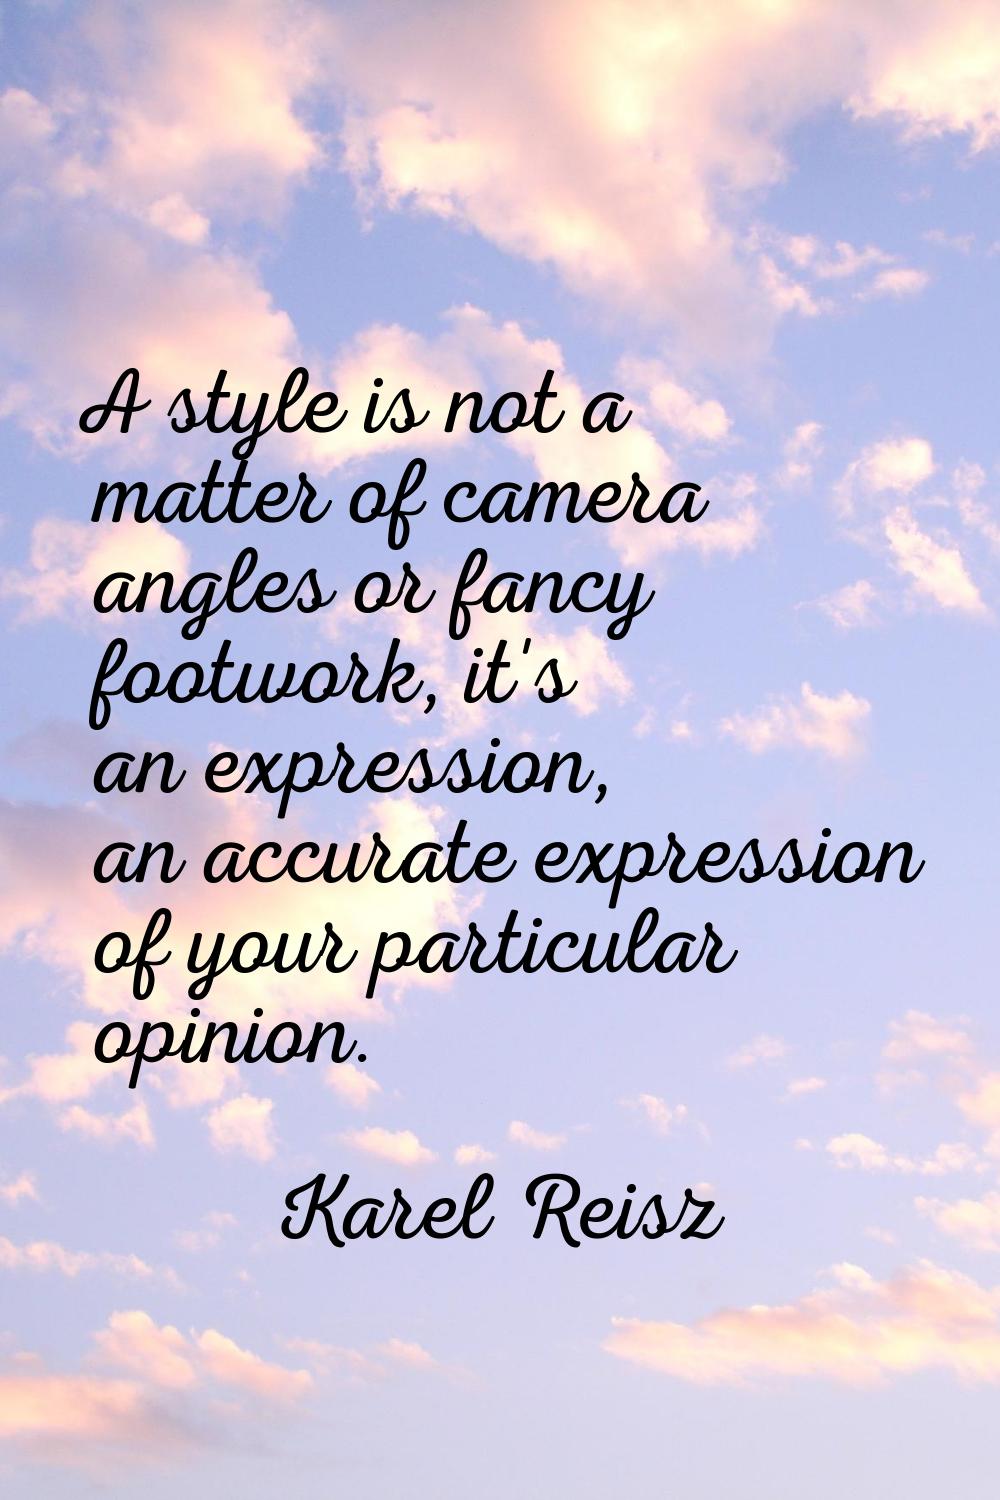 A style is not a matter of camera angles or fancy footwork, it's an expression, an accurate express